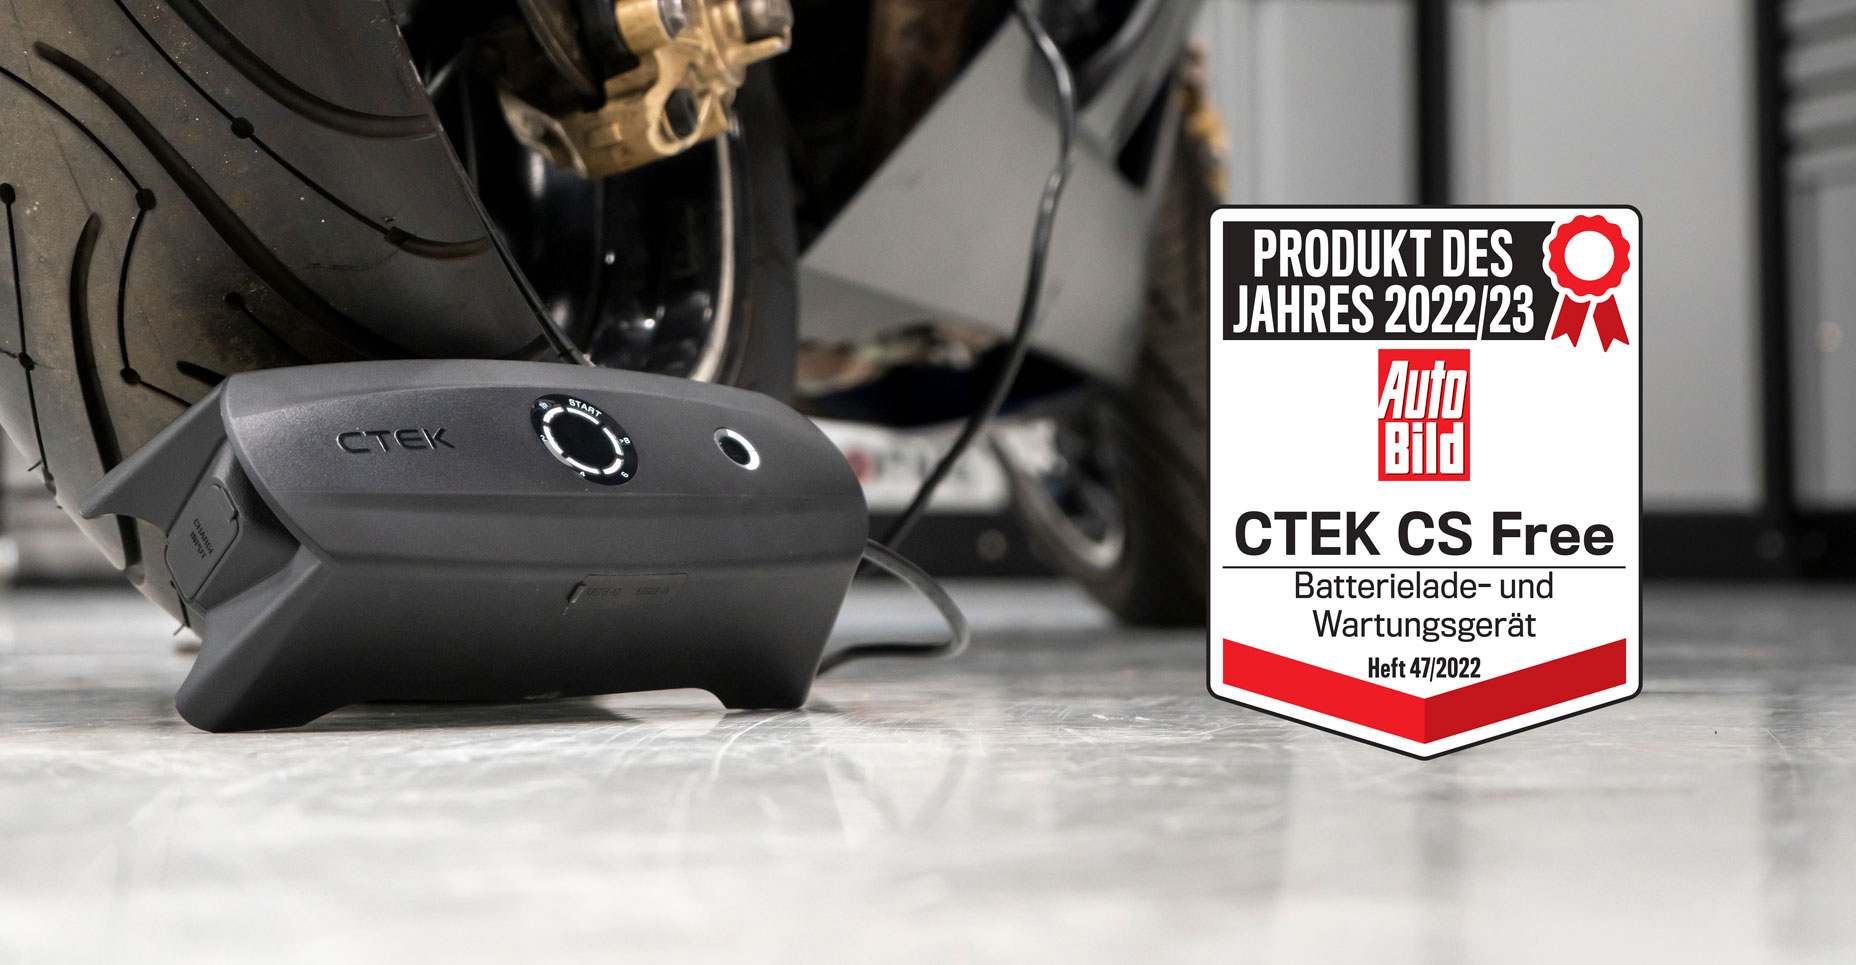 CTEK CS FREE Multi-functional 4-in-1 portable charger 12V with Adaptive Boost technology, part no. 40-462 - ctek.com